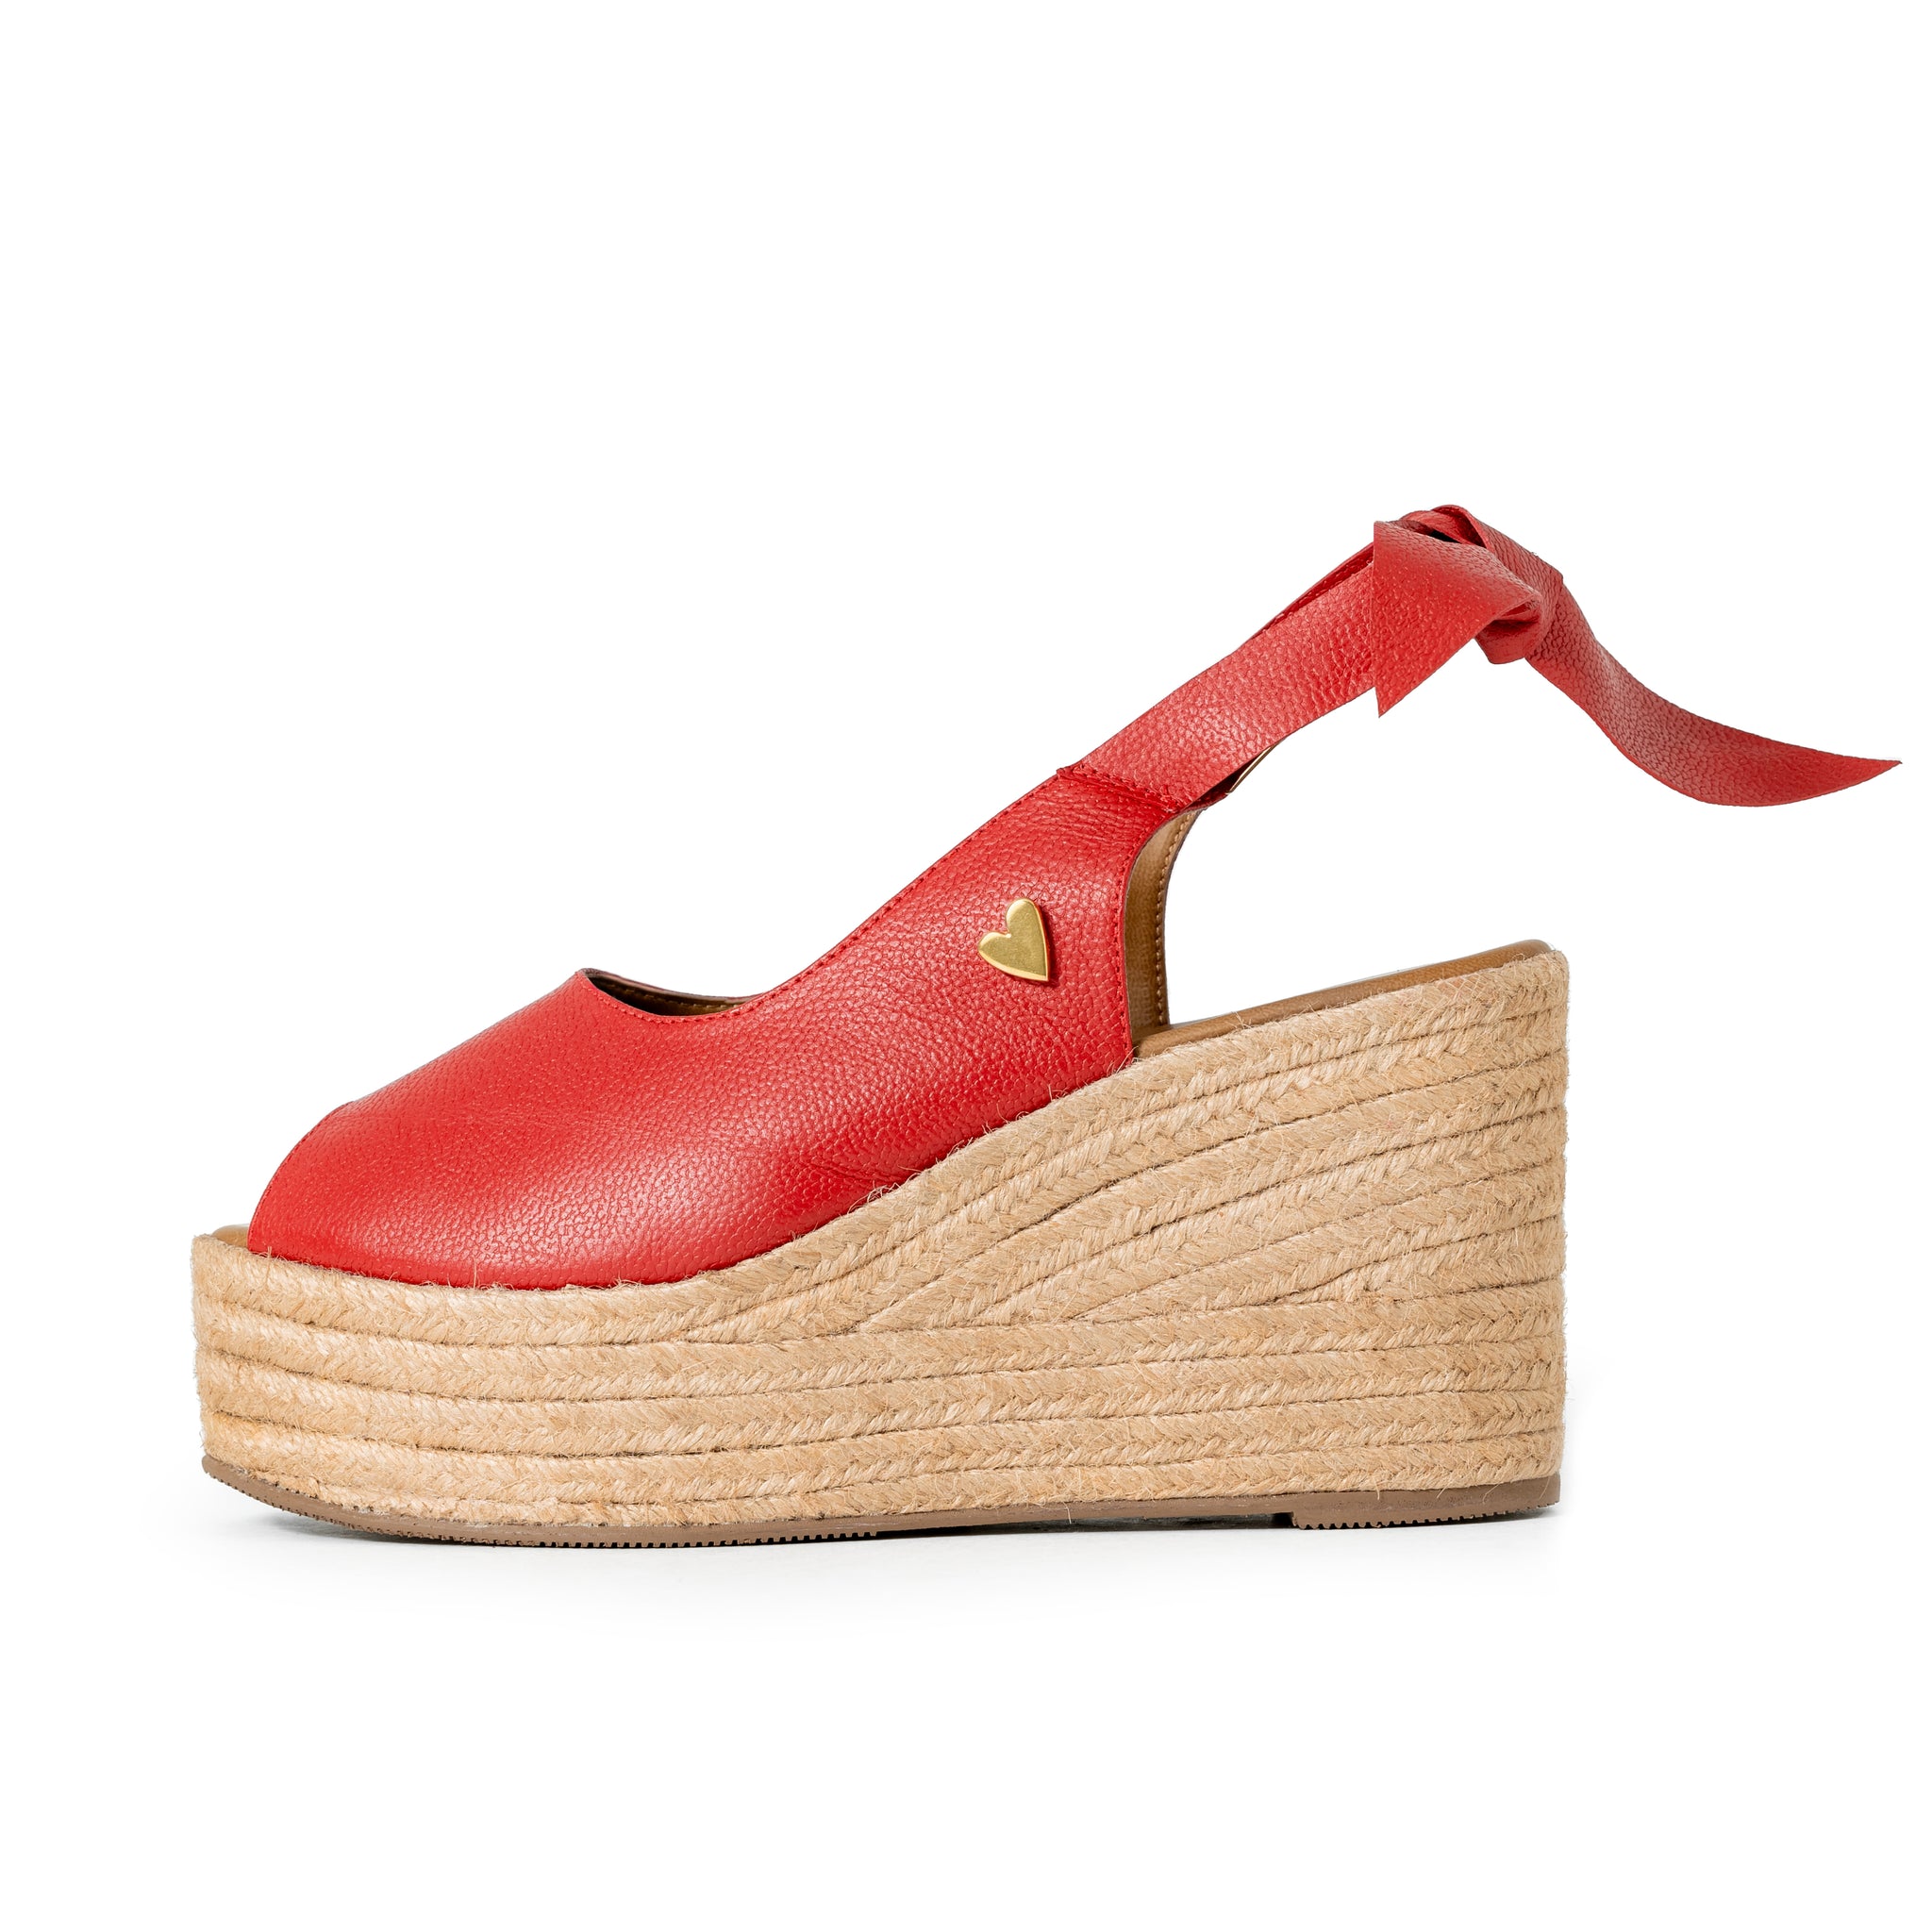 Peep Toe by Nataly Mendez Natural jute base Genuine leather upper Genuine leather insole. 3.5 inch heel height 2 inch platform